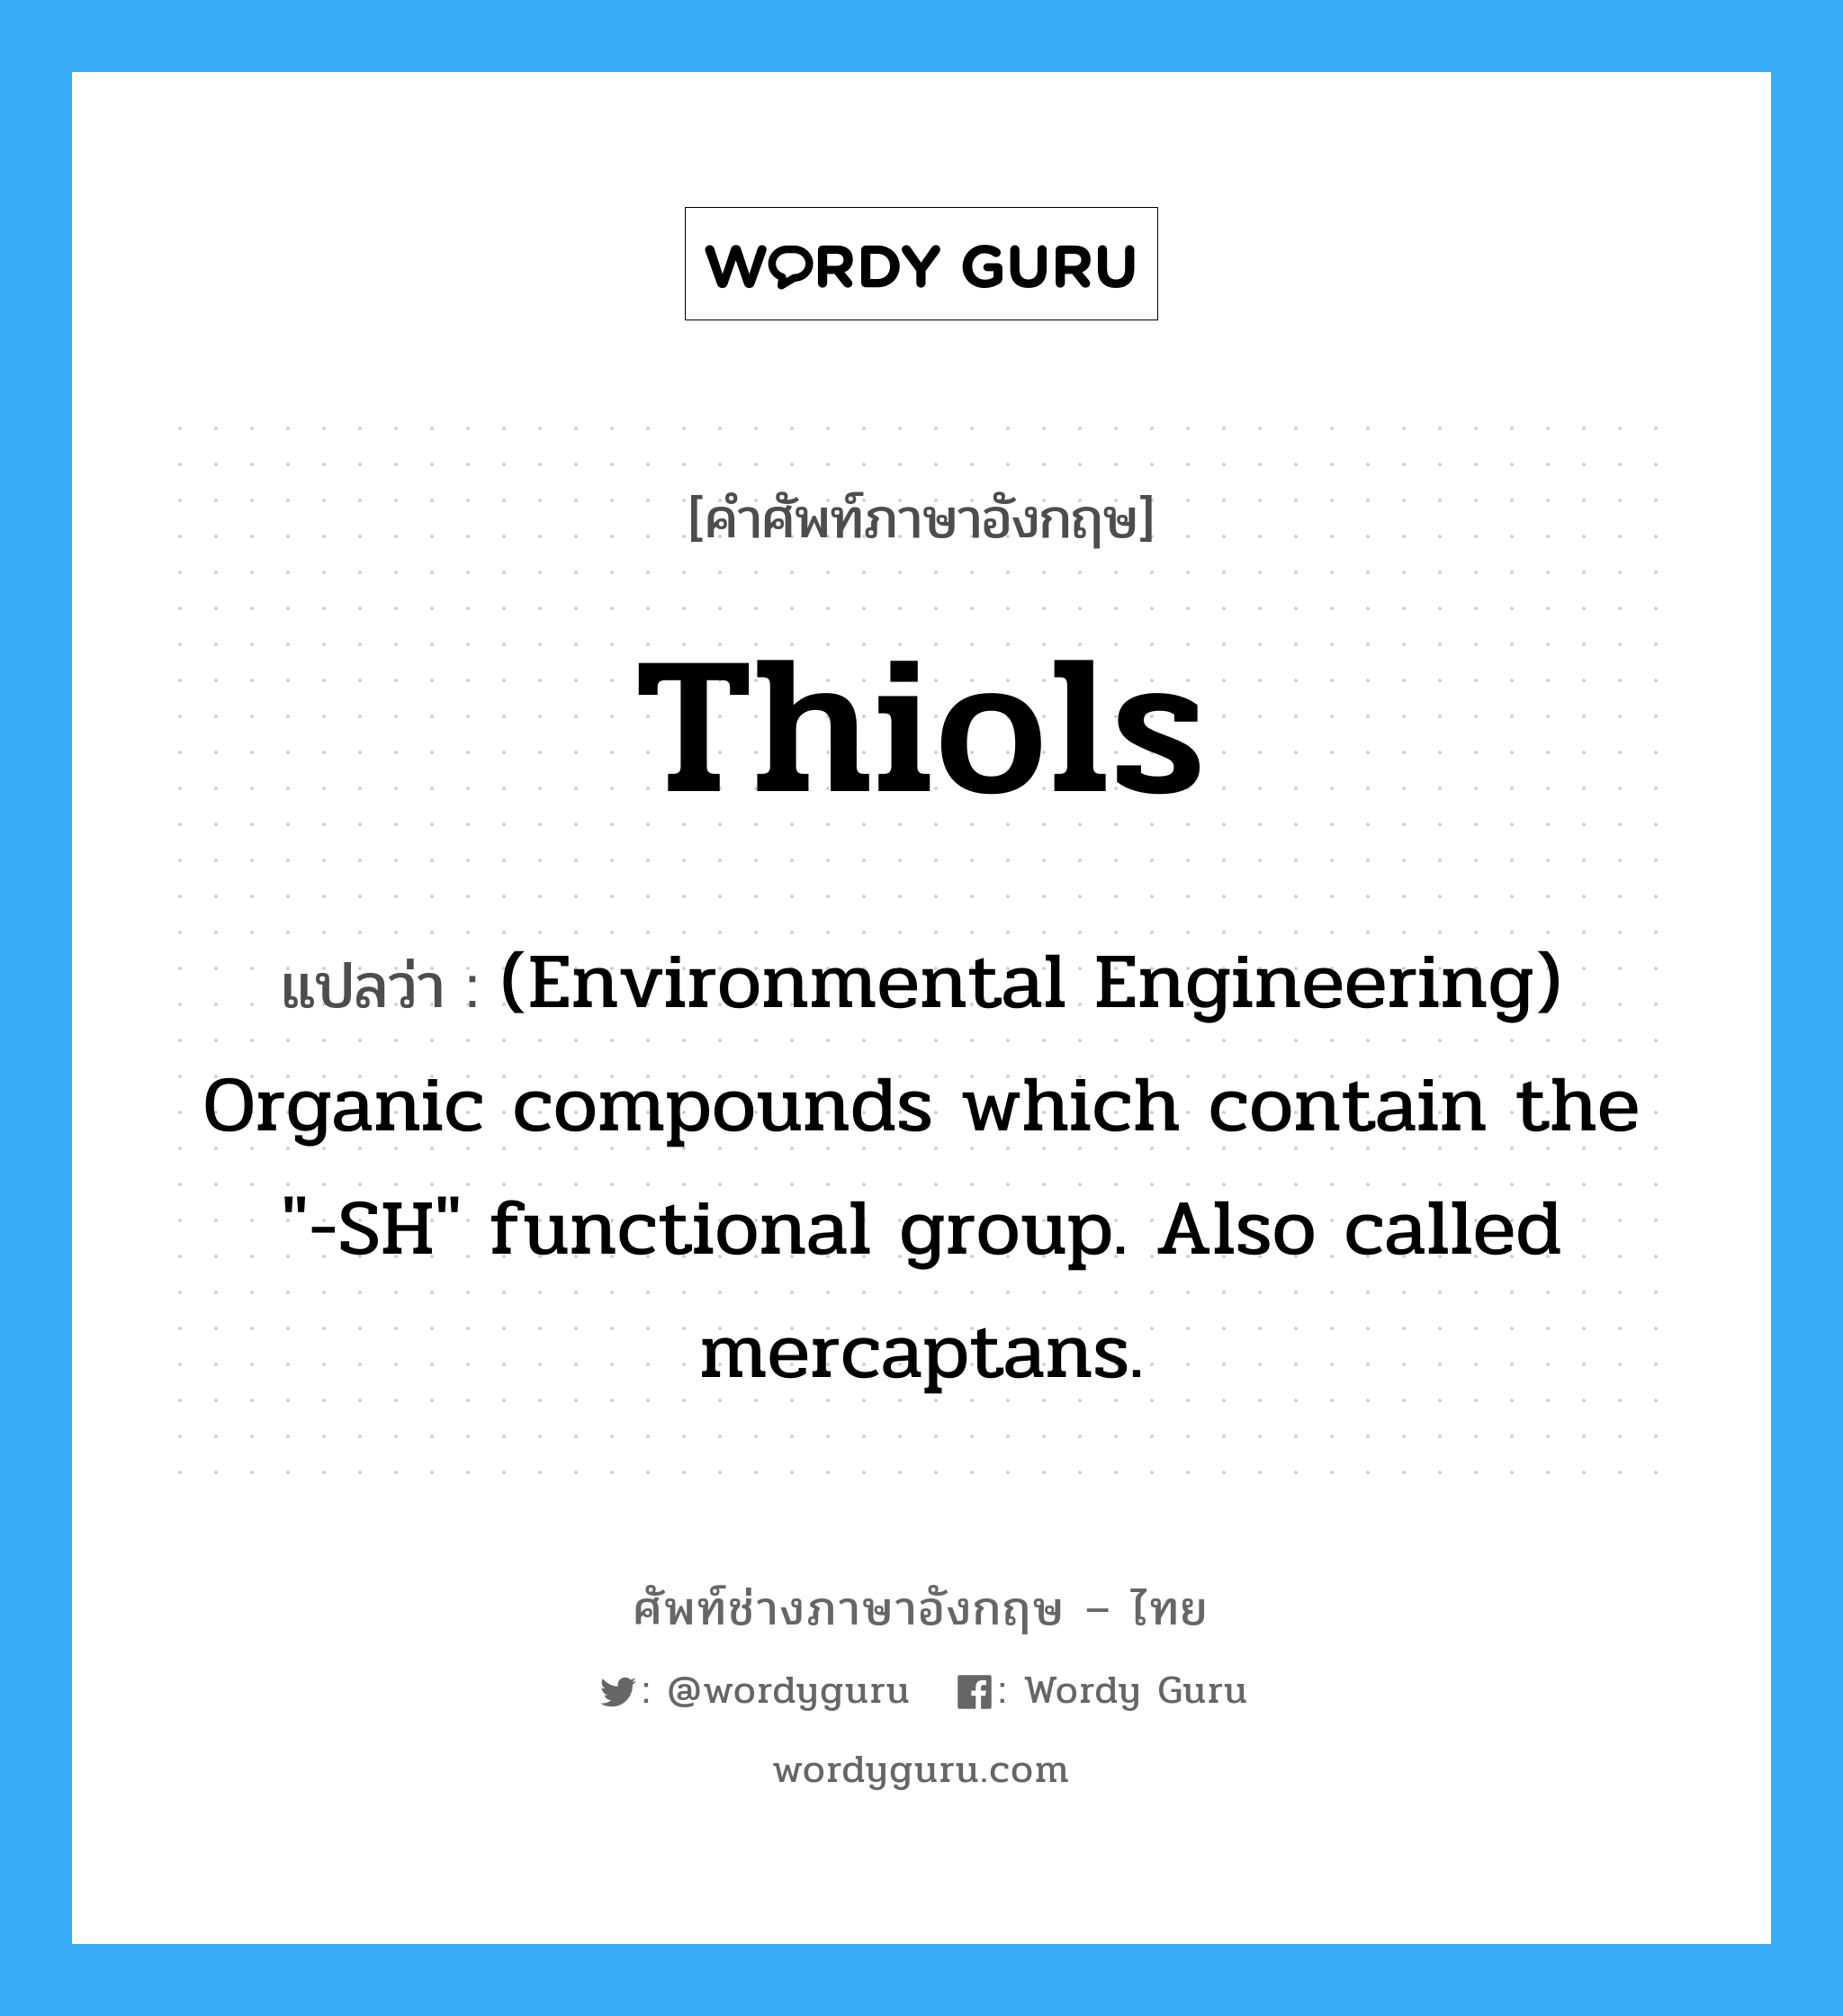 Thiols แปลว่า?, คำศัพท์ช่างภาษาอังกฤษ - ไทย Thiols คำศัพท์ภาษาอังกฤษ Thiols แปลว่า (Environmental Engineering) Organic compounds which contain the "-SH" functional group. Also called mercaptans.